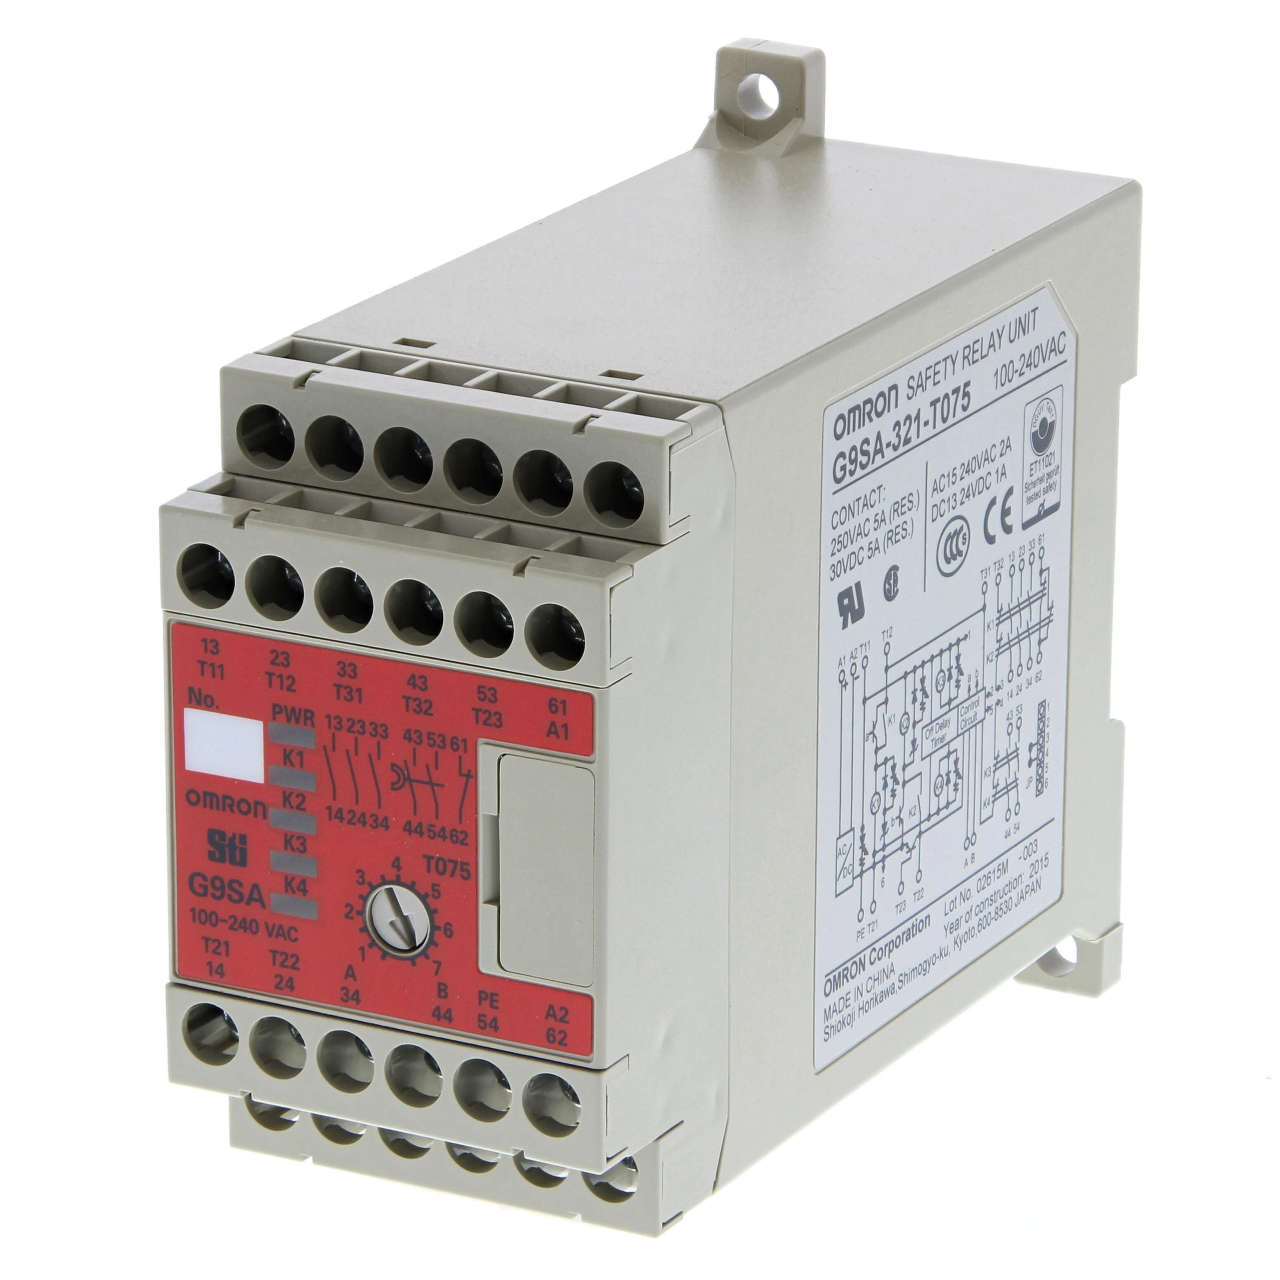 Omron - G9SA-321-T15 AC/DC24  Safety relay unit, 3PST-NO (Category 4), 5 A, SPST-NC aux, DPST-NO 1 to 15sec 'OFF-delay' category 3 outputs, 1 or 2 channel input